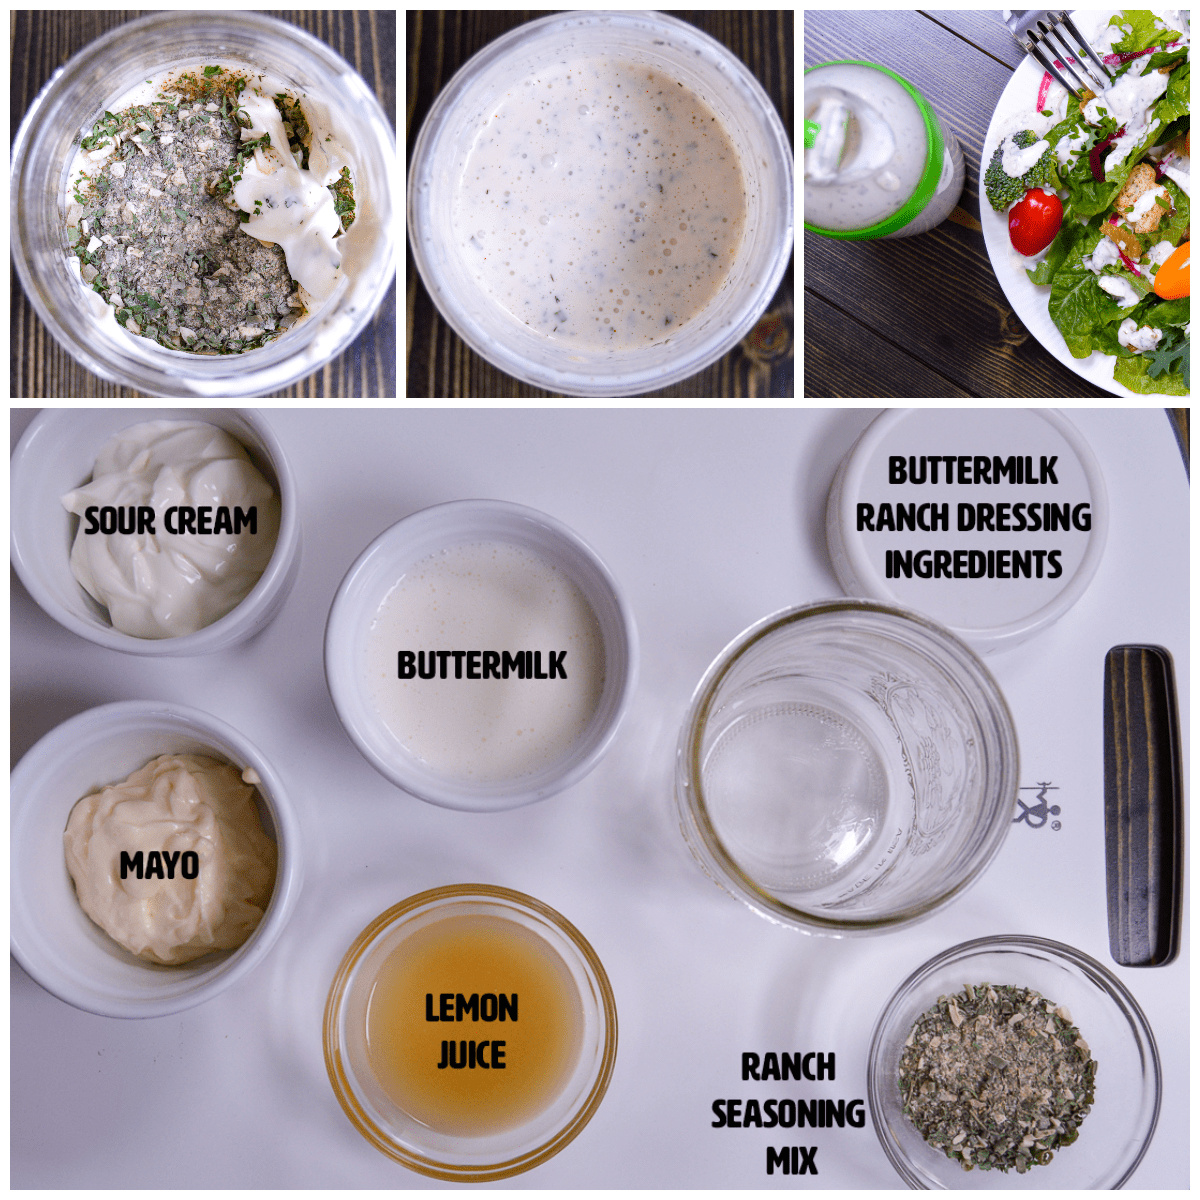 Buttermilk Ranch Dressing Ingredients and Steps